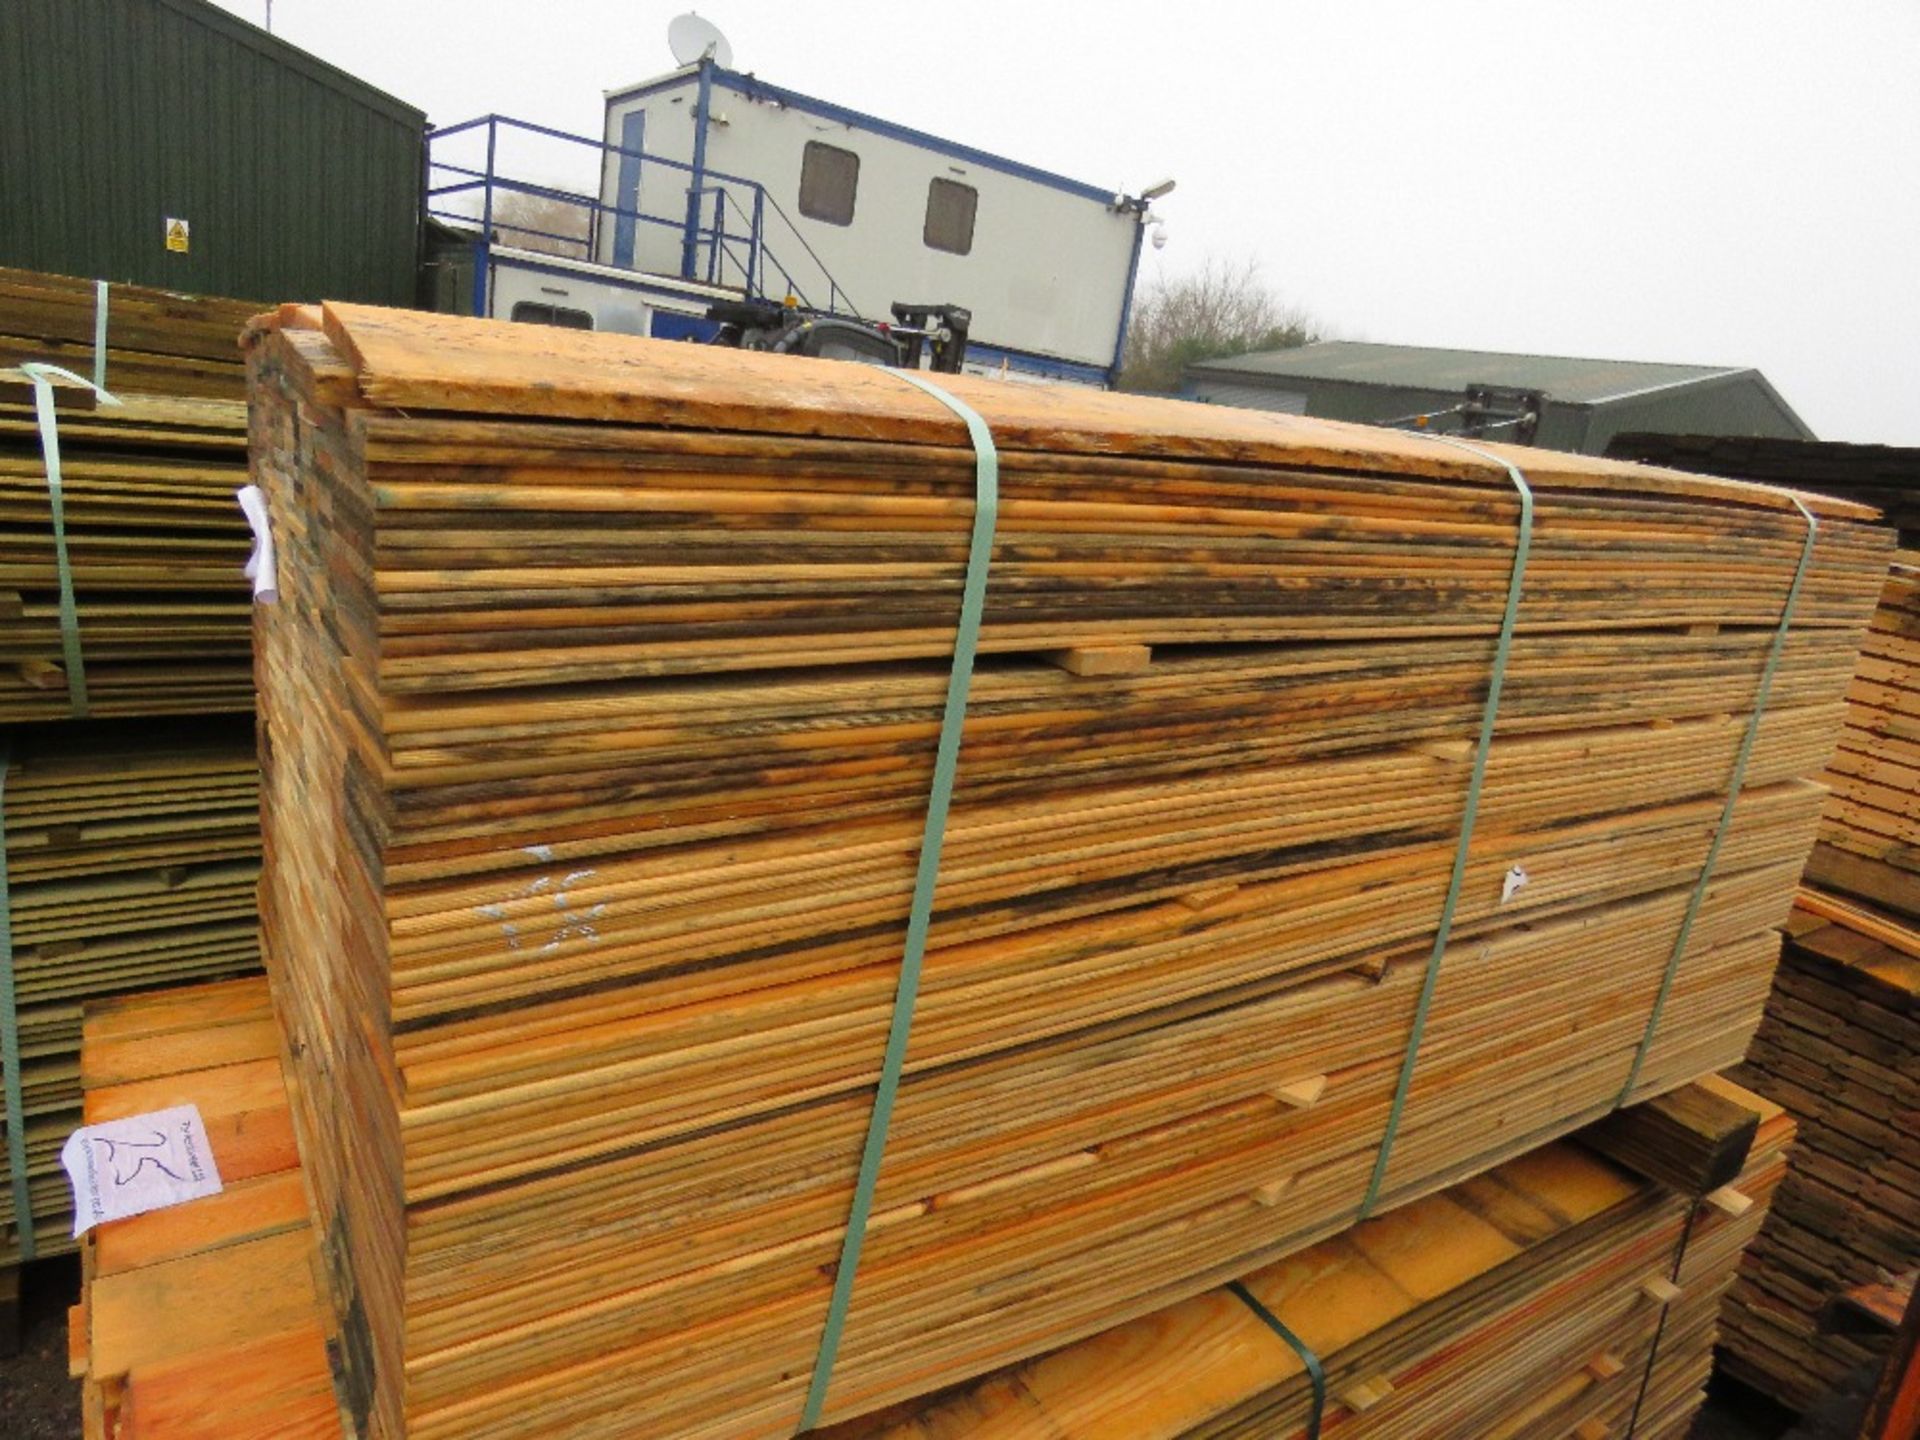 PACK OF UNTREATED MACHINED FLAT FENCE CLADDING BOARDS. 1.44M X 10CM APPROX. - Image 5 of 6